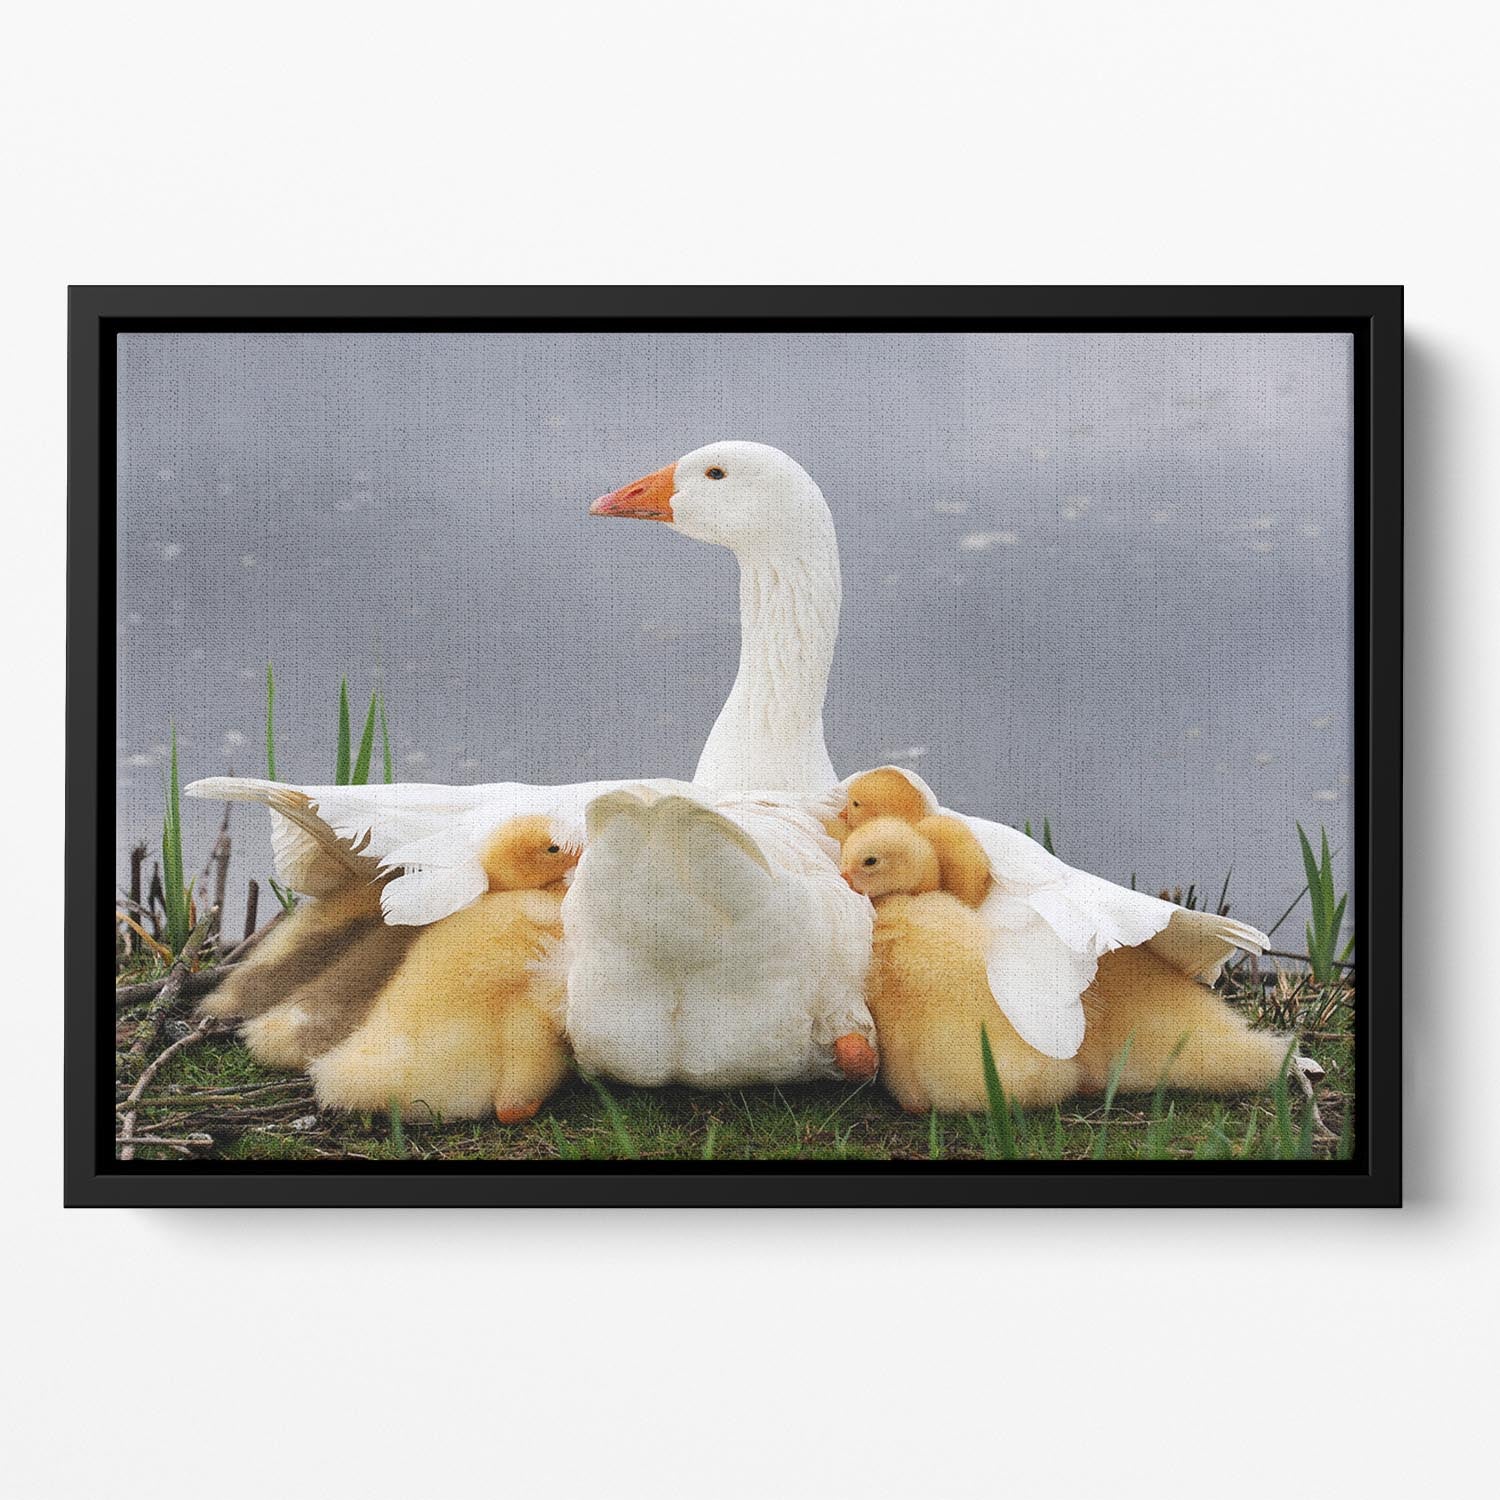 Mums protection Floating Framed Canvas - 1x - 2